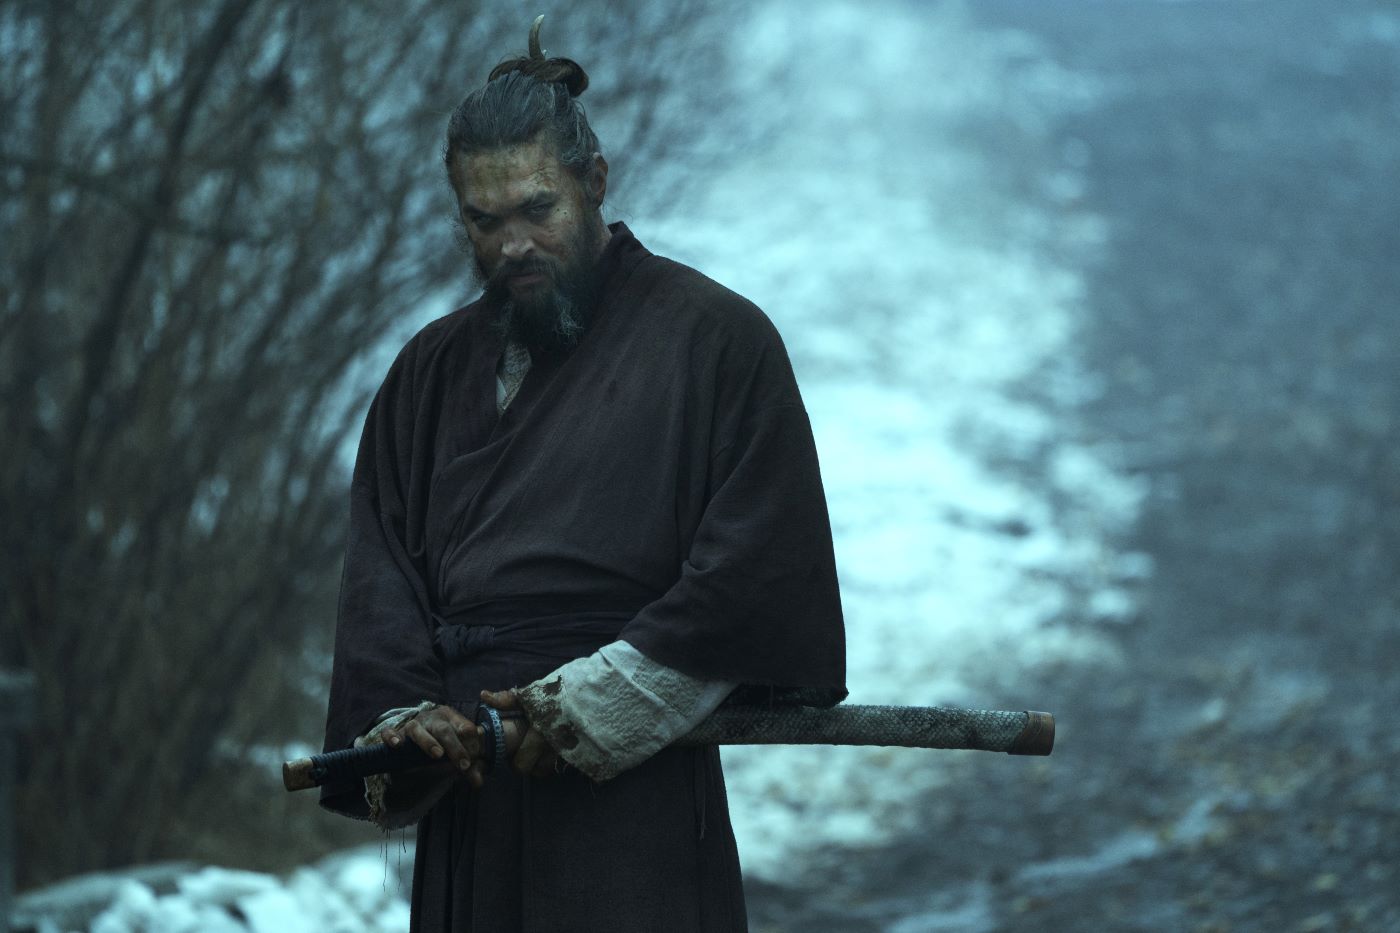 Jason Momoa in a scene from 'See' standing in a wooded snowy area with a brown robe and a blood stained white shirt sleeve underneath with his hand on his sword about to draw it.